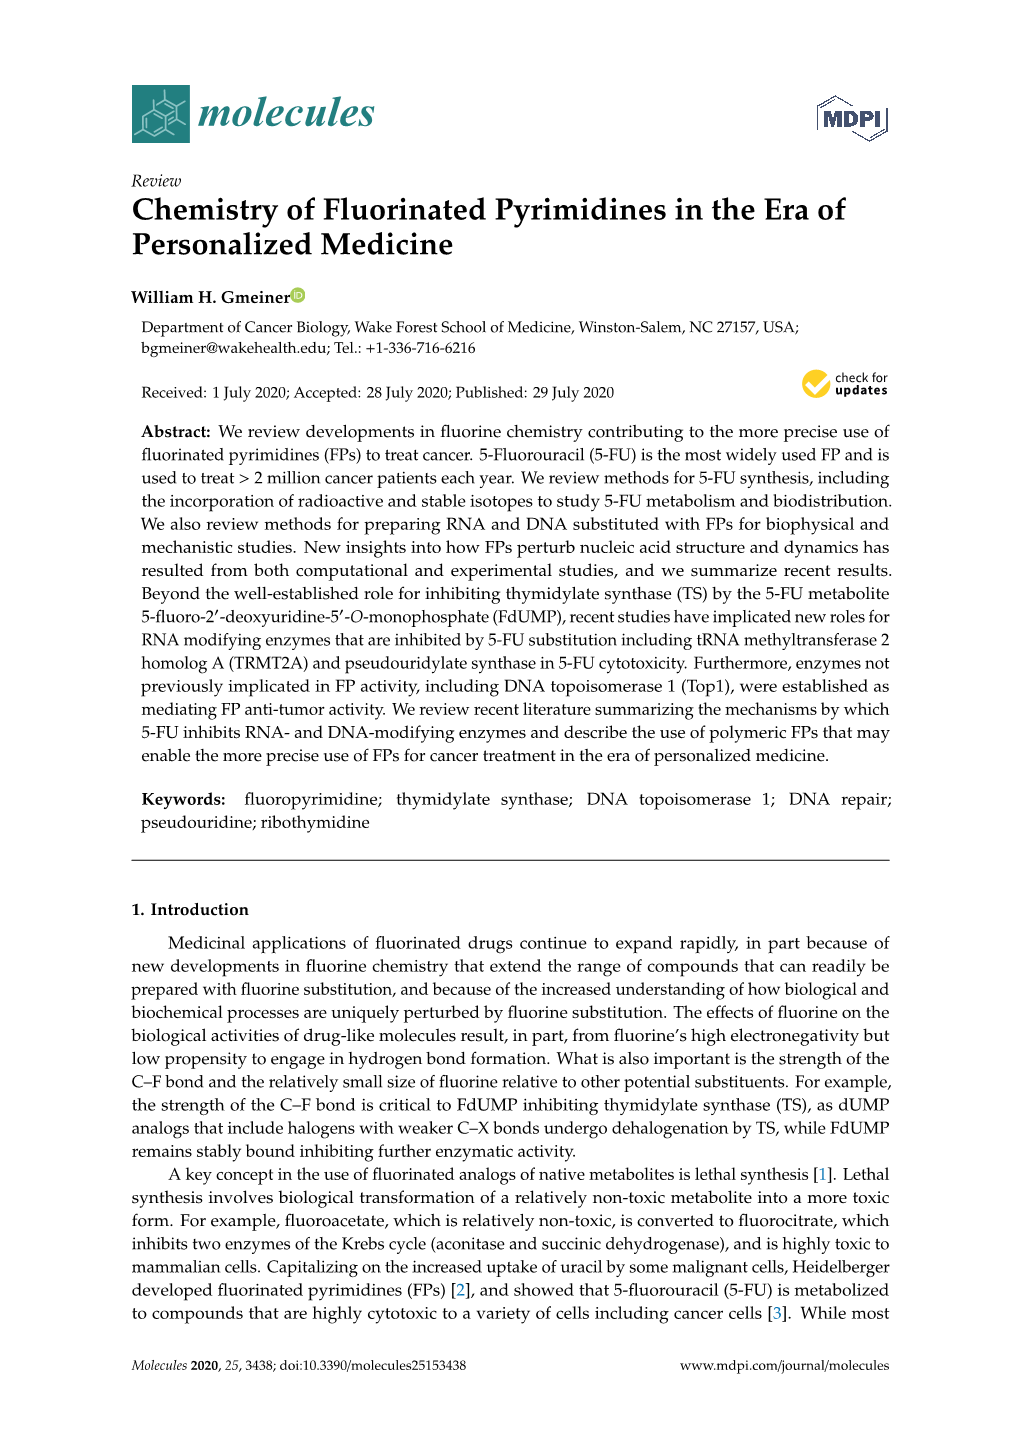 Chemistry of Fluorinated Pyrimidines in the Era of Personalized Medicine